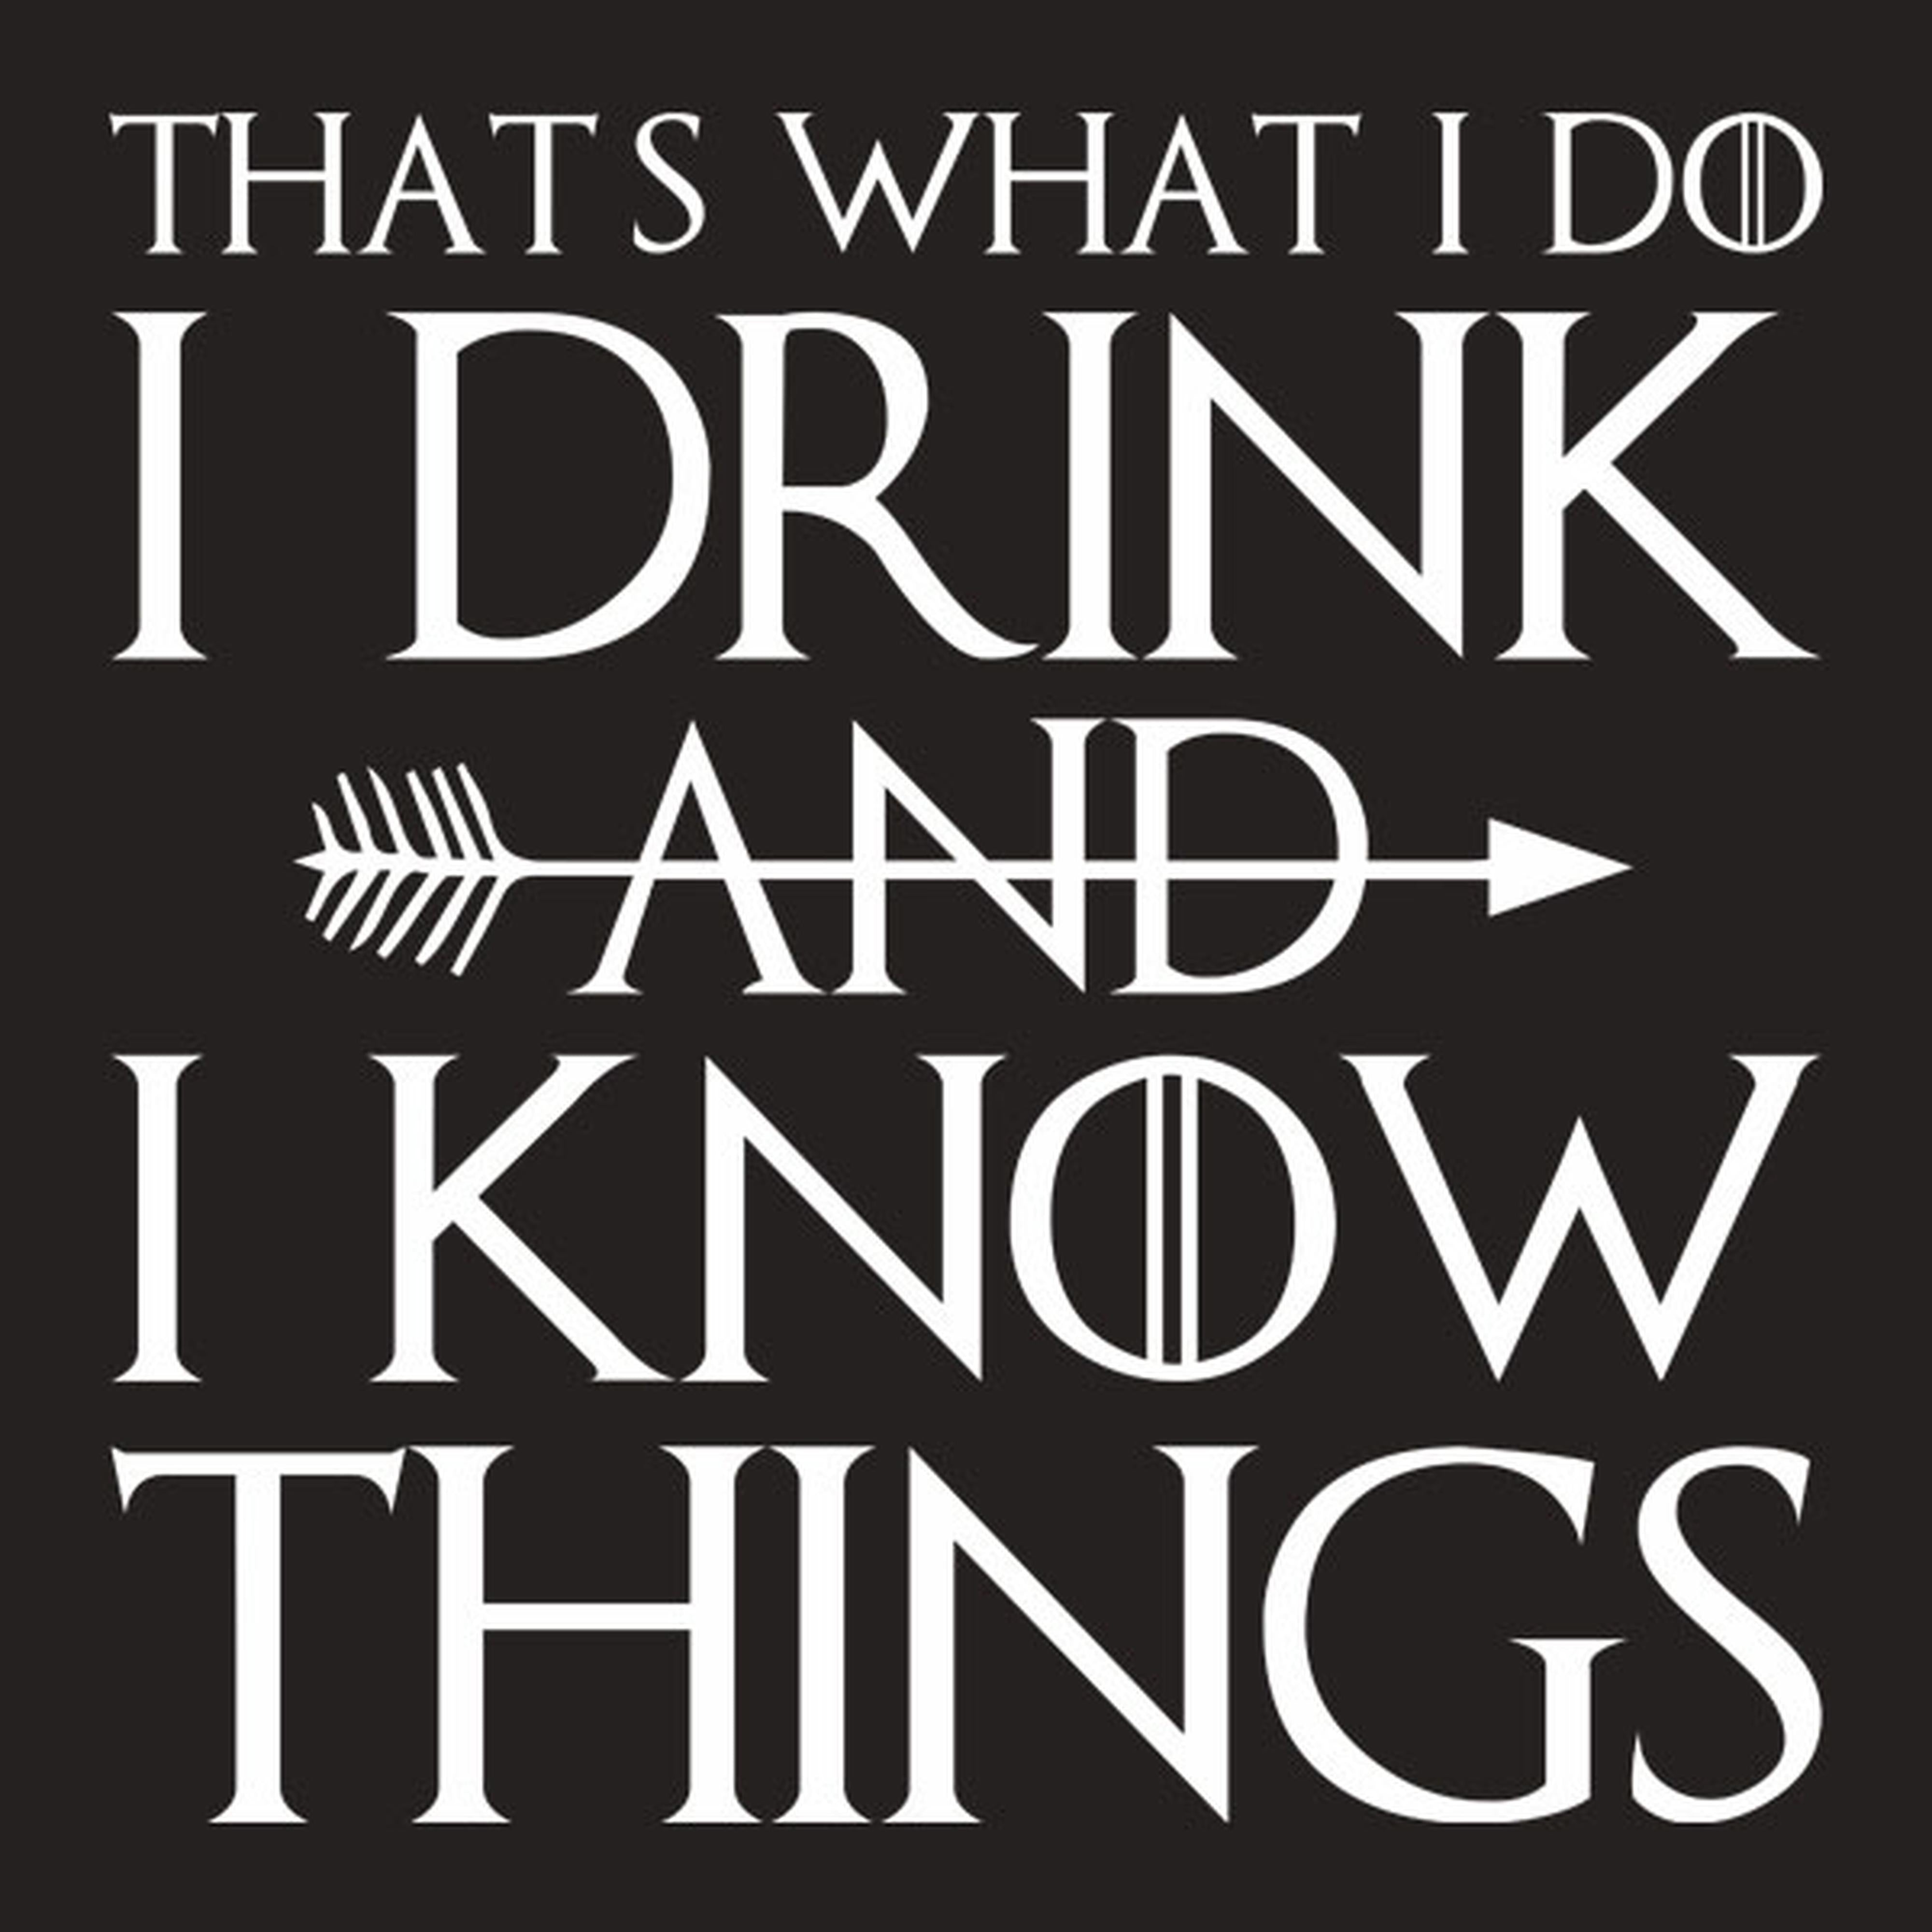 I drink and I know things - T-shirt